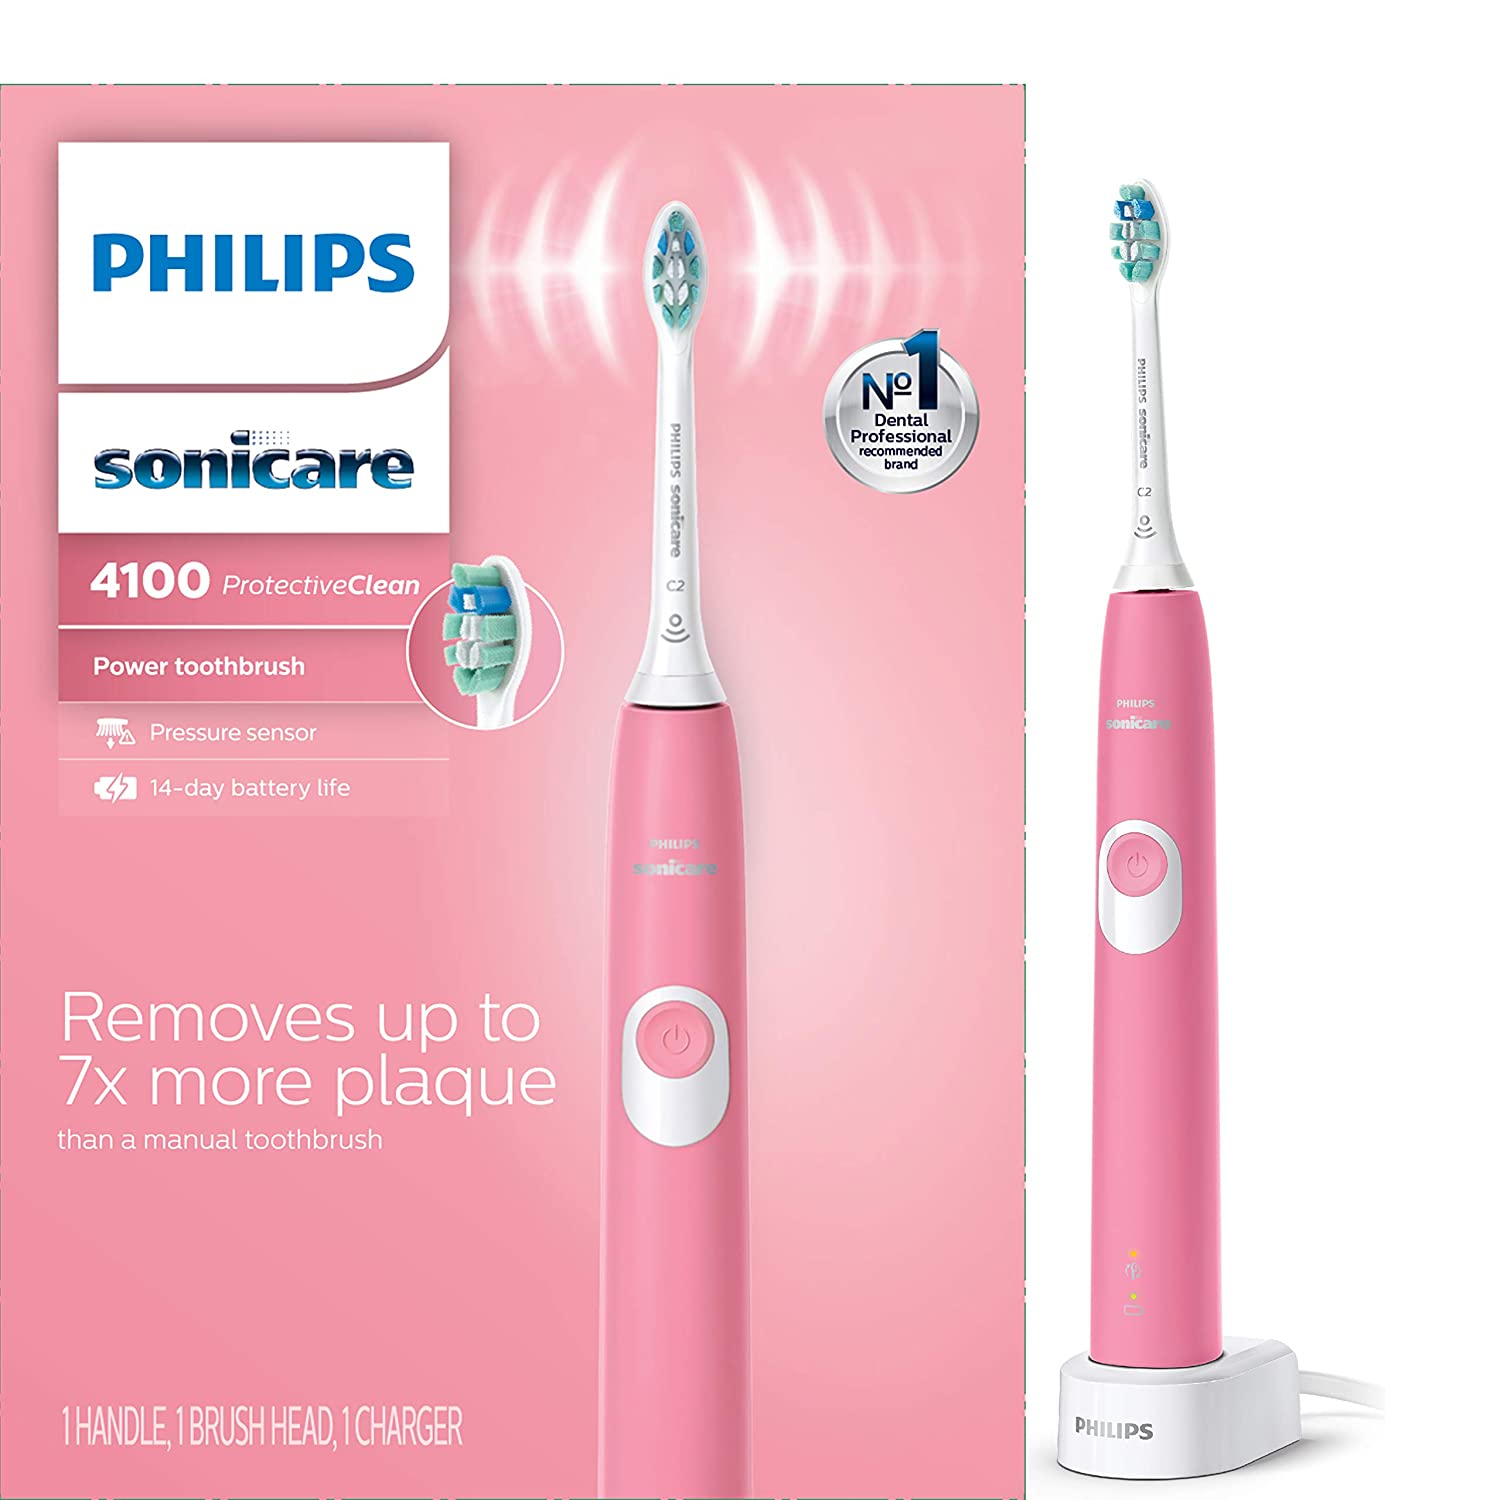 Philips Sonicare HX6815/01 ProtectiveClean 4100 Rechargeable Electric Toothbrush, Pink